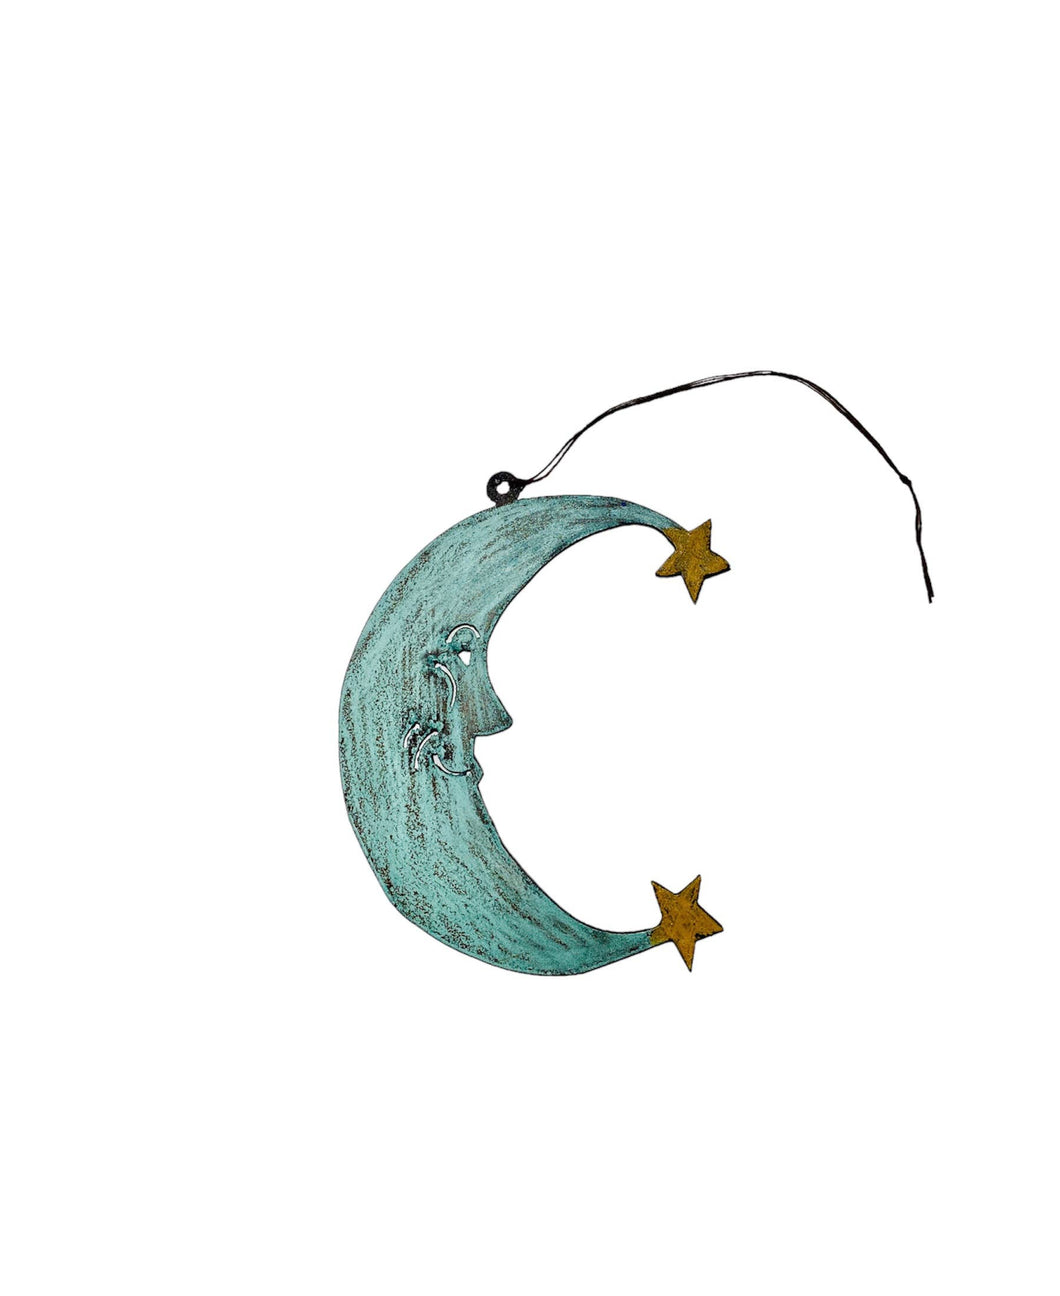 Moon Ornament Celestial zodiac recycled metal gifts USA eco